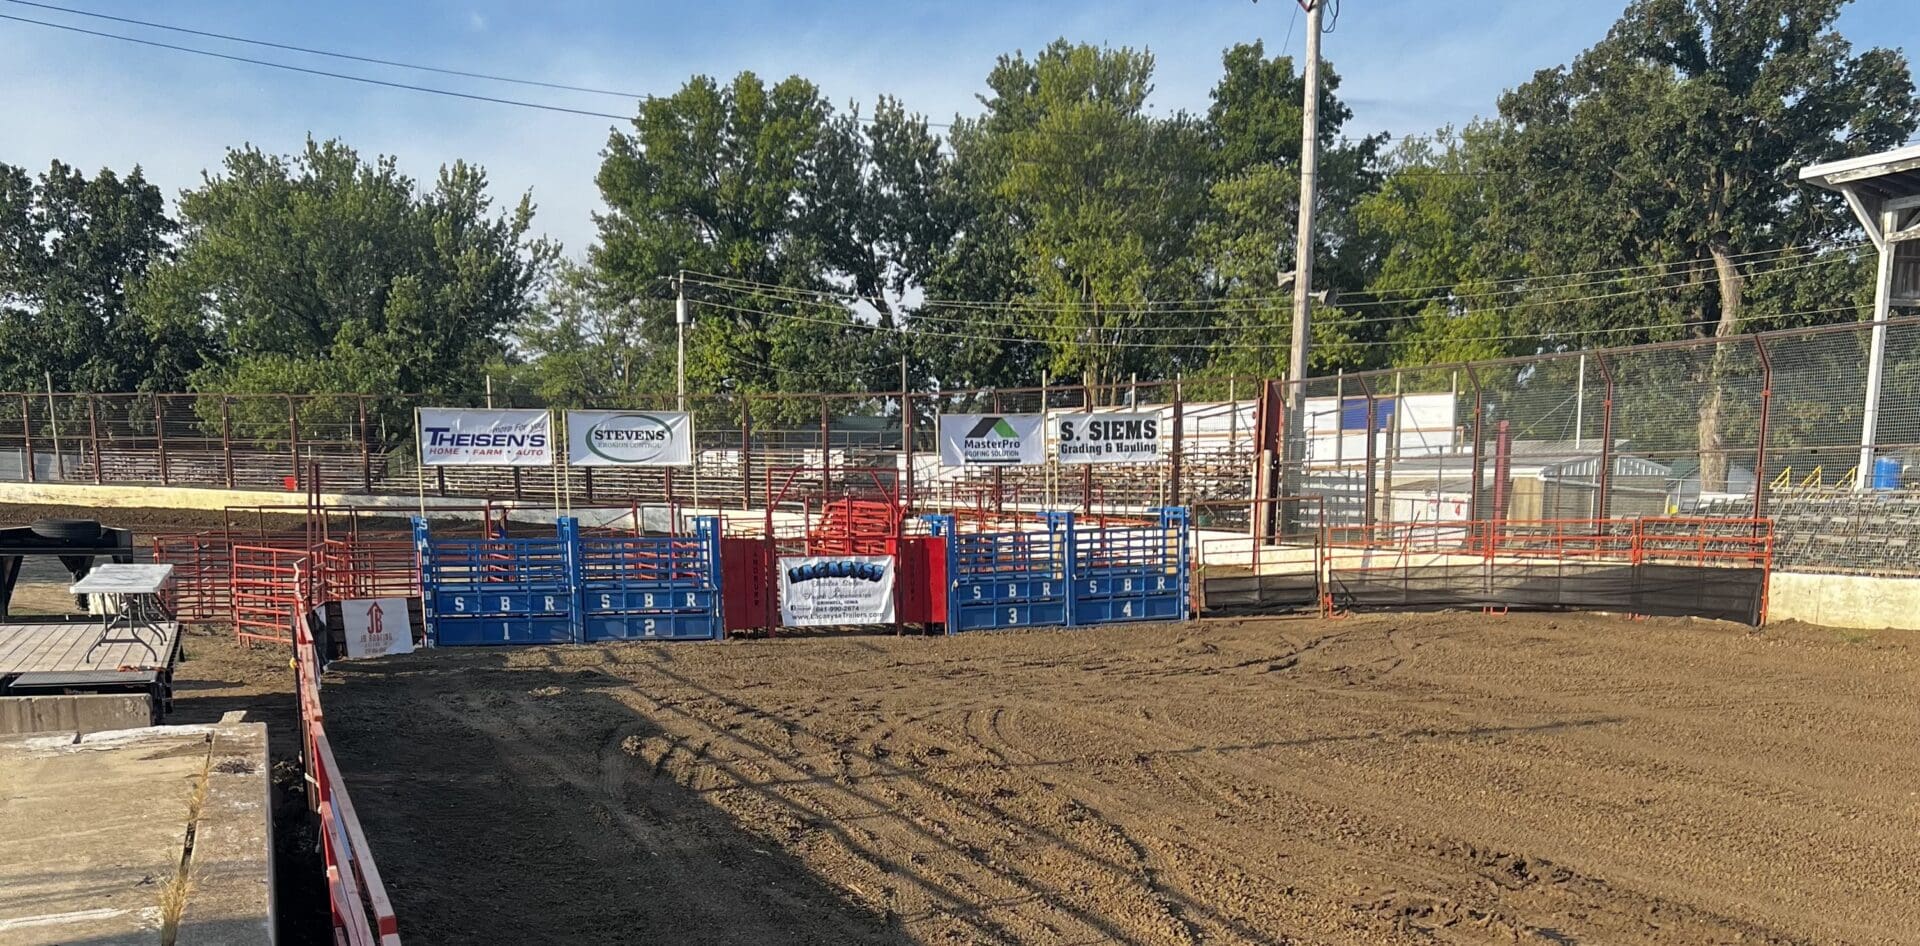 A dirt field with blue and red barriers around it.